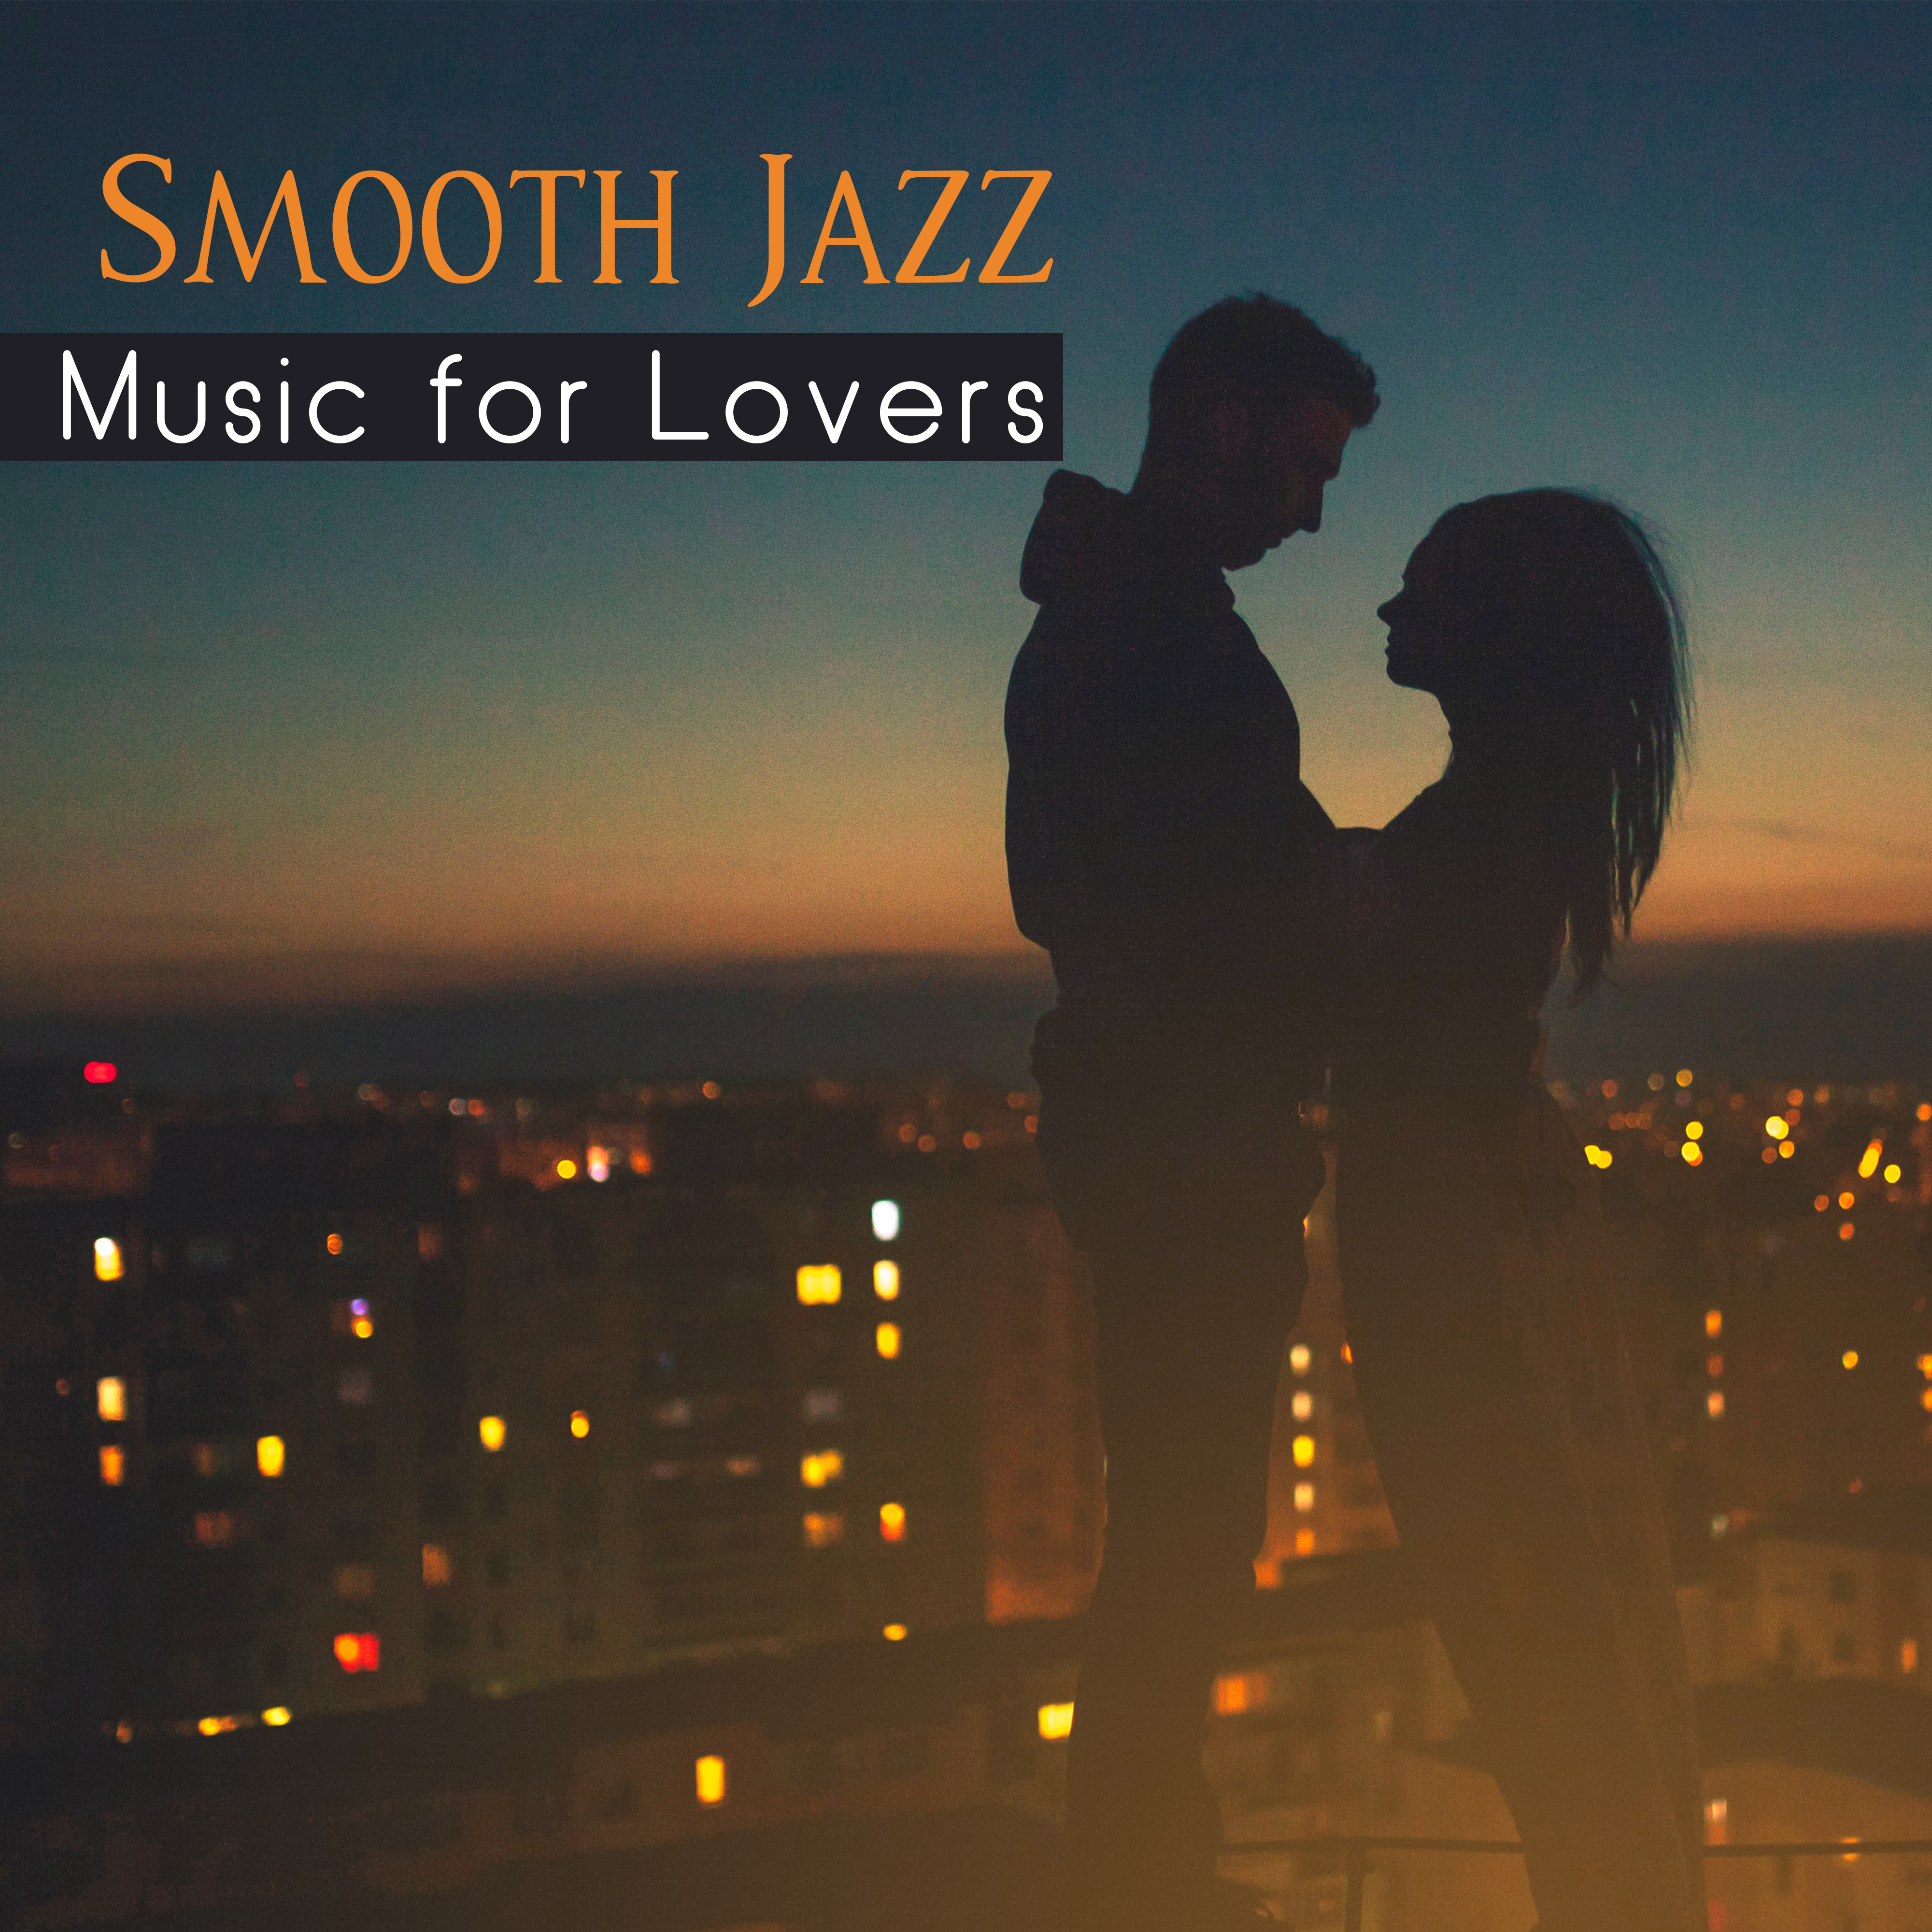 Smooth Jazz Music for Lovers  Jazz Music to Fall in Love, Romantic Background Sounds, Instrumental Note